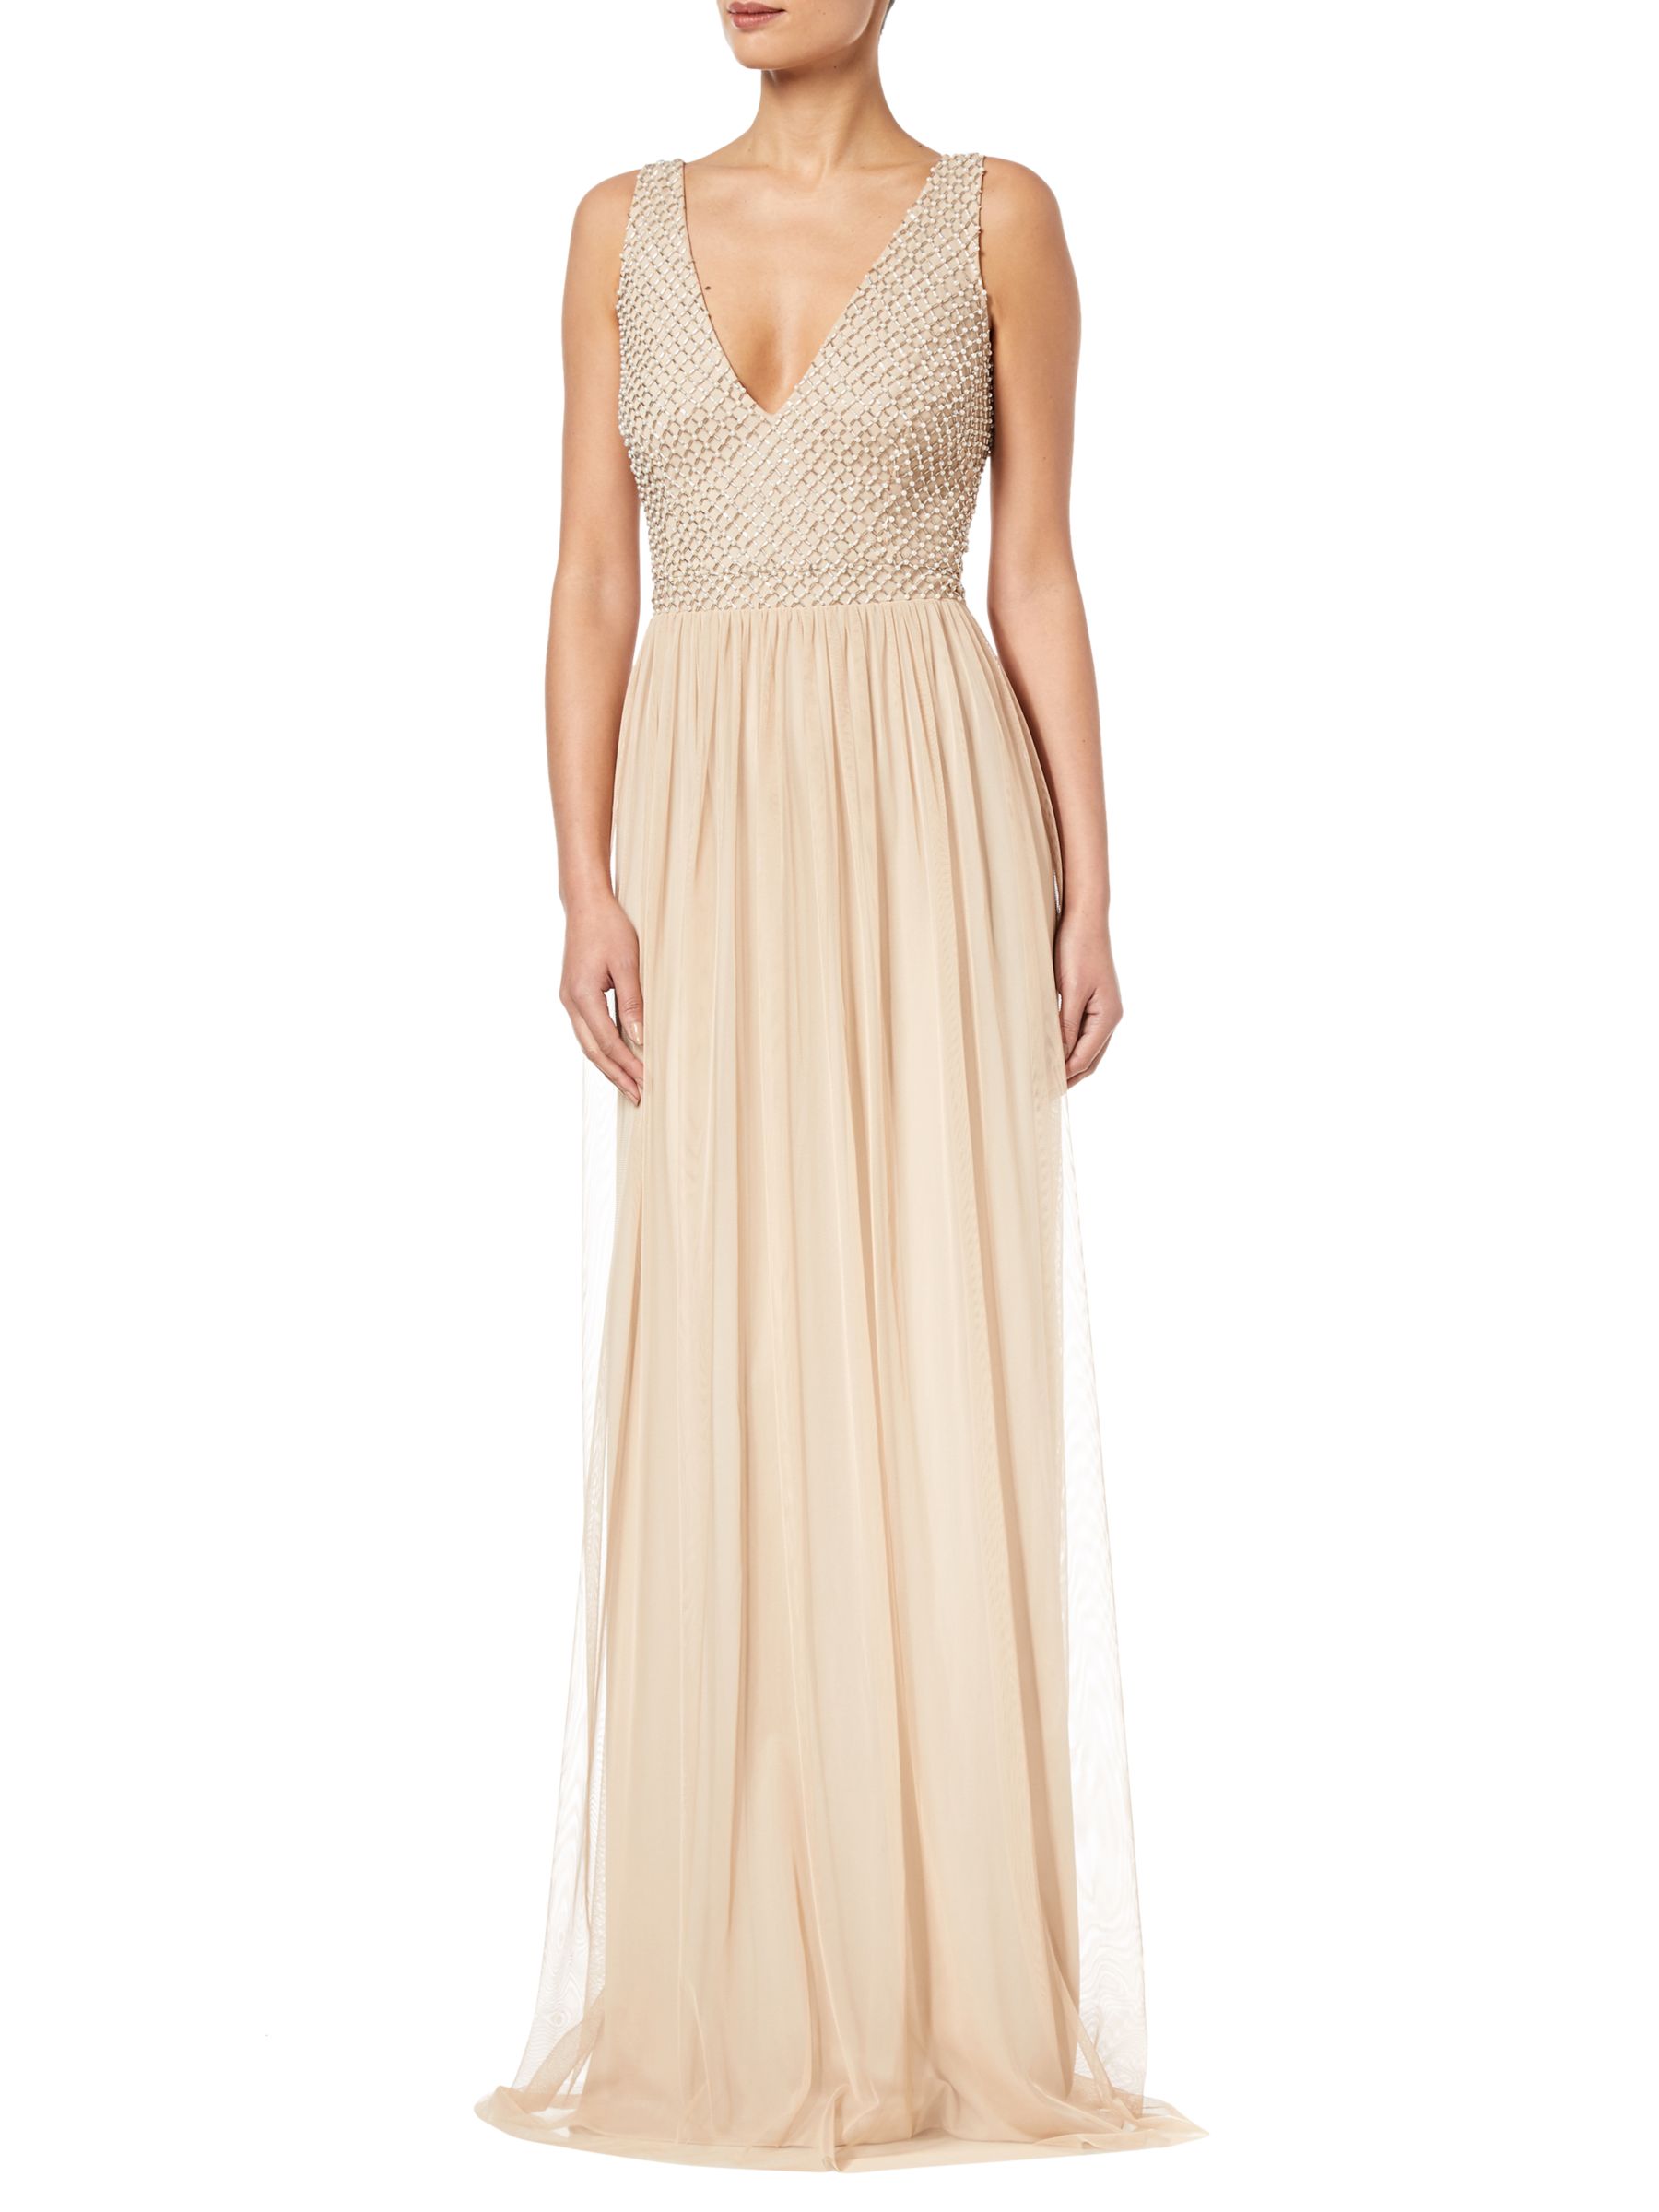 Adrianna Papell Plus Beaded V-Neck Dress, Champagne at John Lewis ...